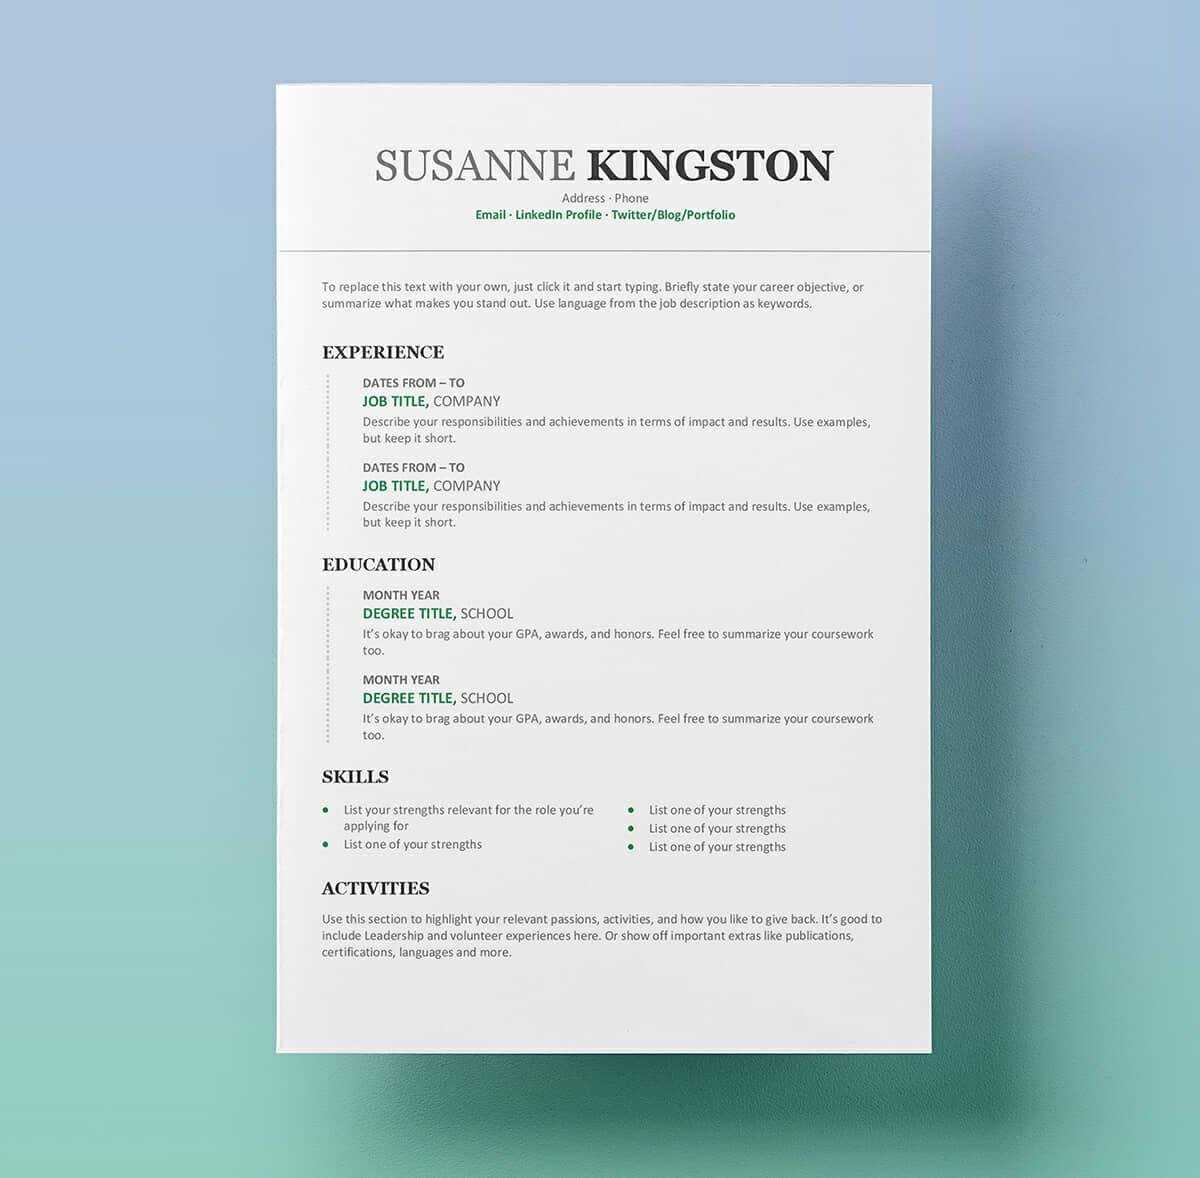 Free Resume Templates For Word - Papele.alimentacionsegura For Free Resume Template Microsoft Word